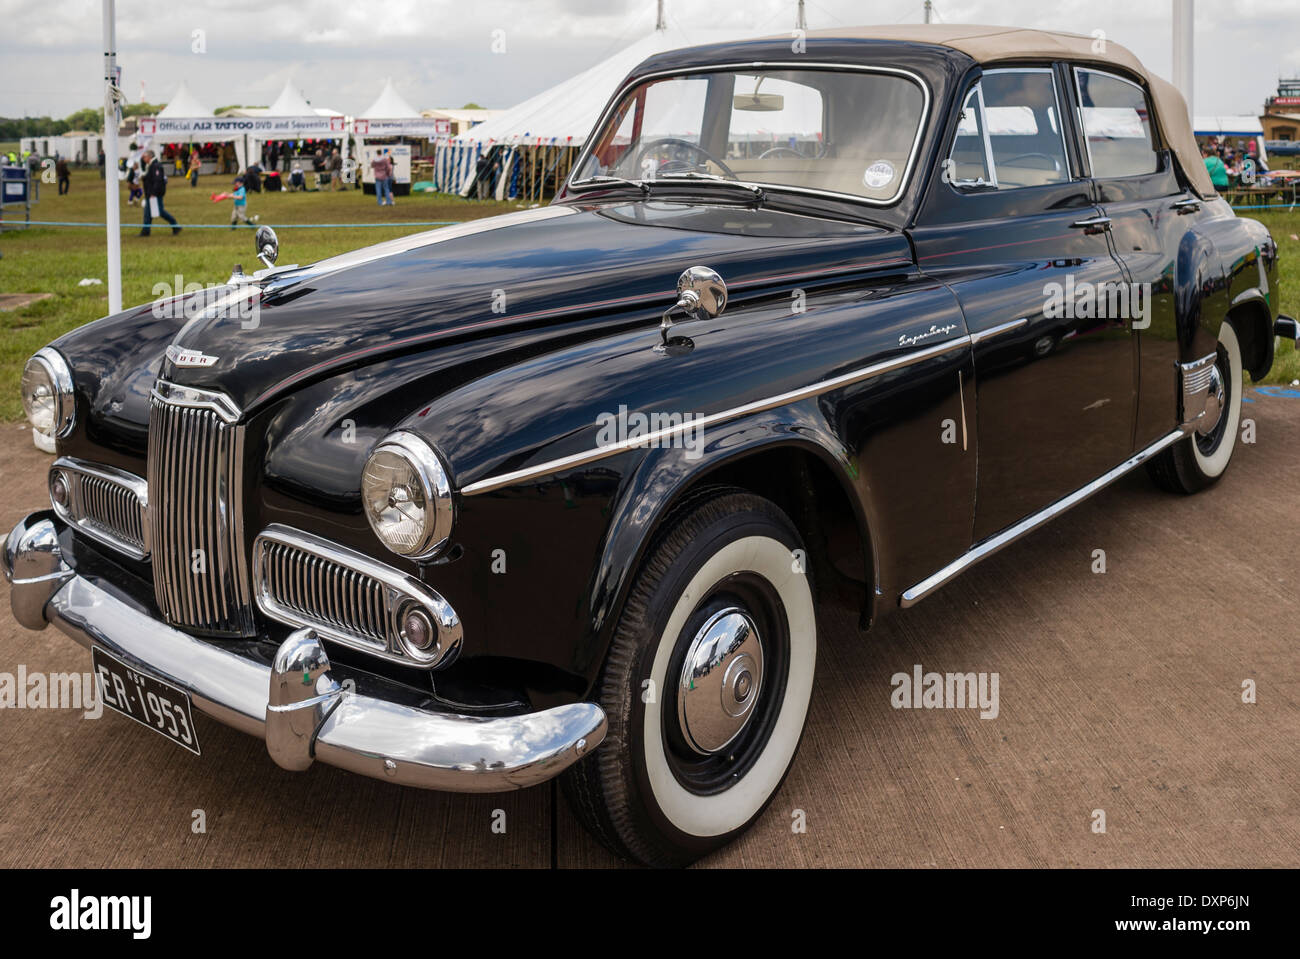 Historical Royal car on show in UK Stock Photo